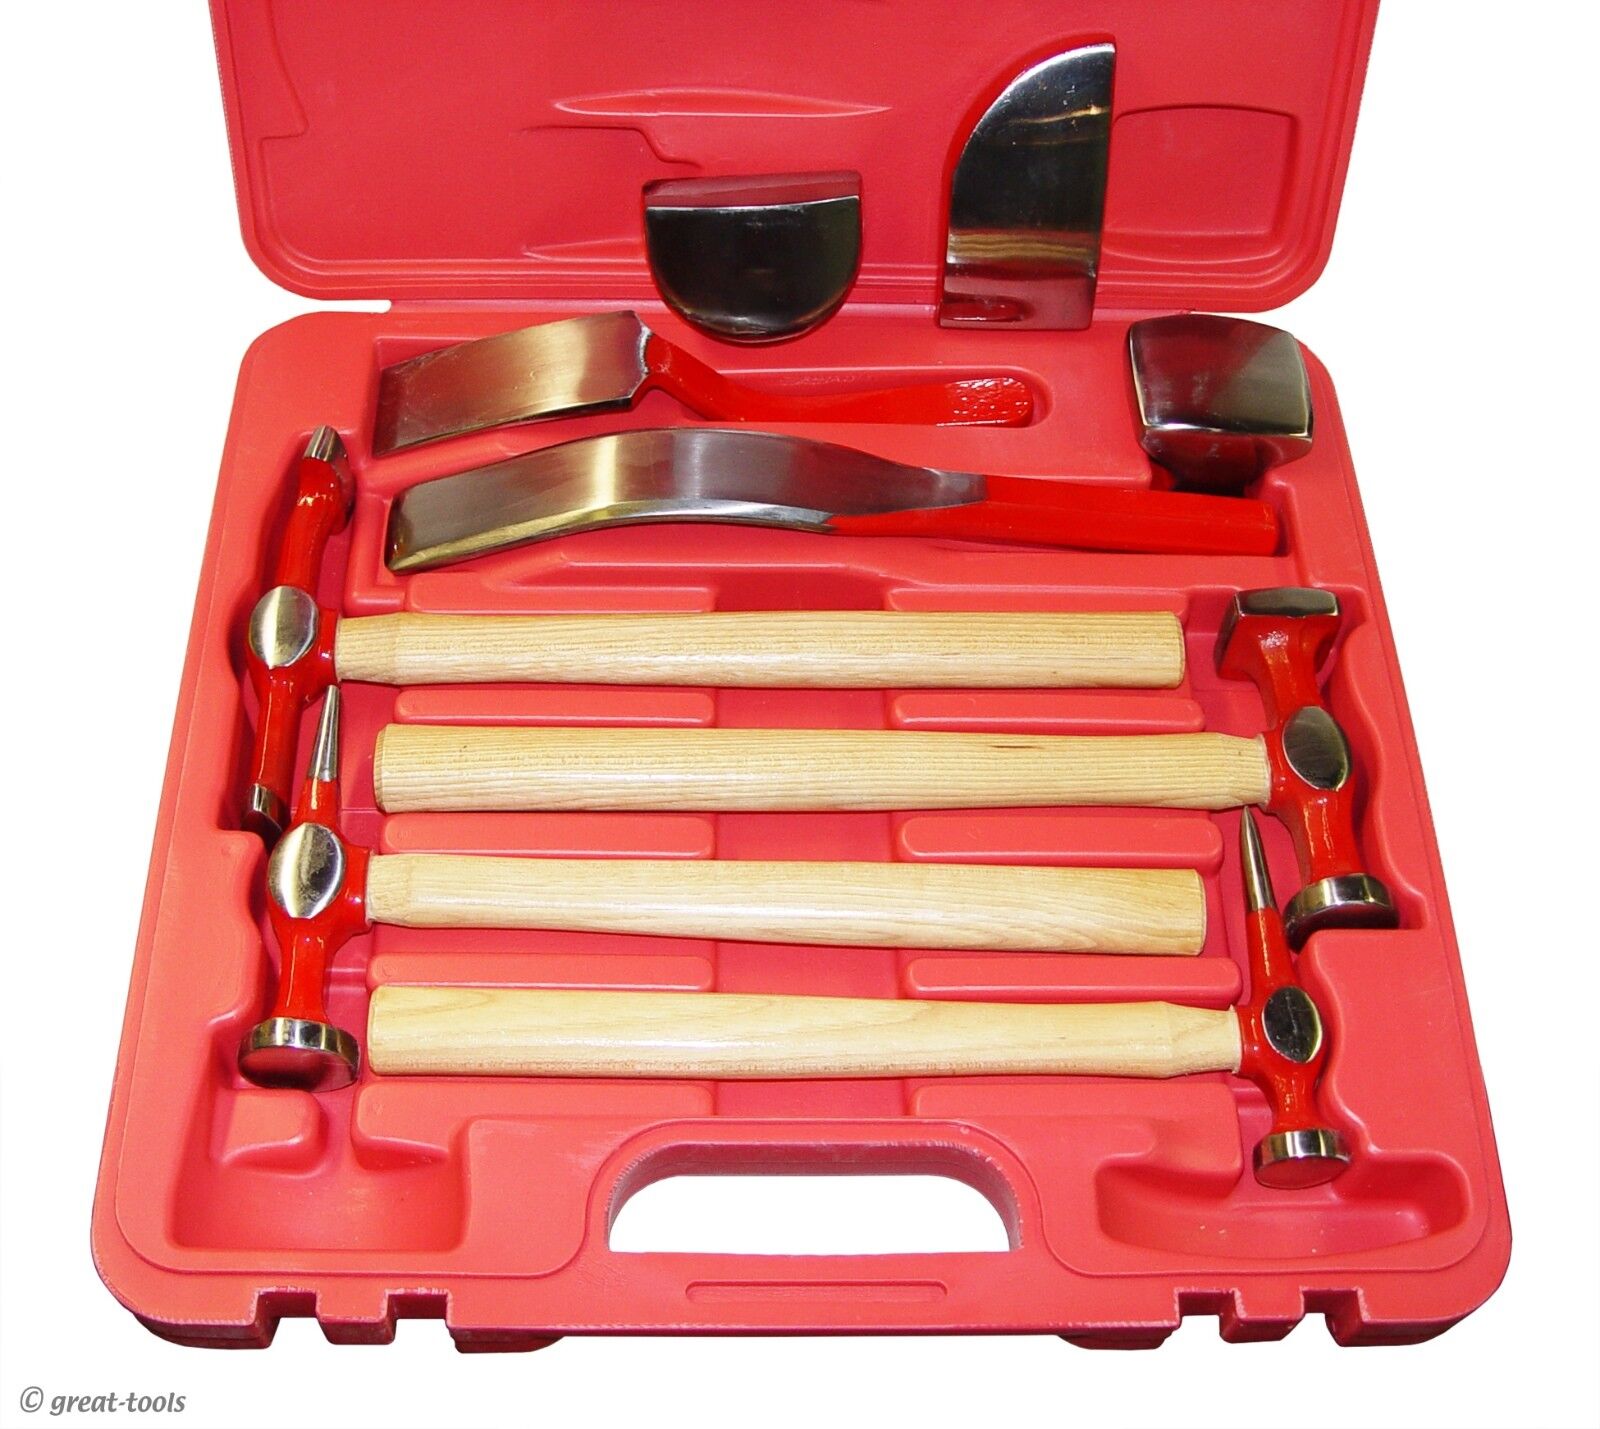 PROFESSIONAL AUTO BODY REPAIR TOOLS – highly polished hammers & dollies, 9-pc